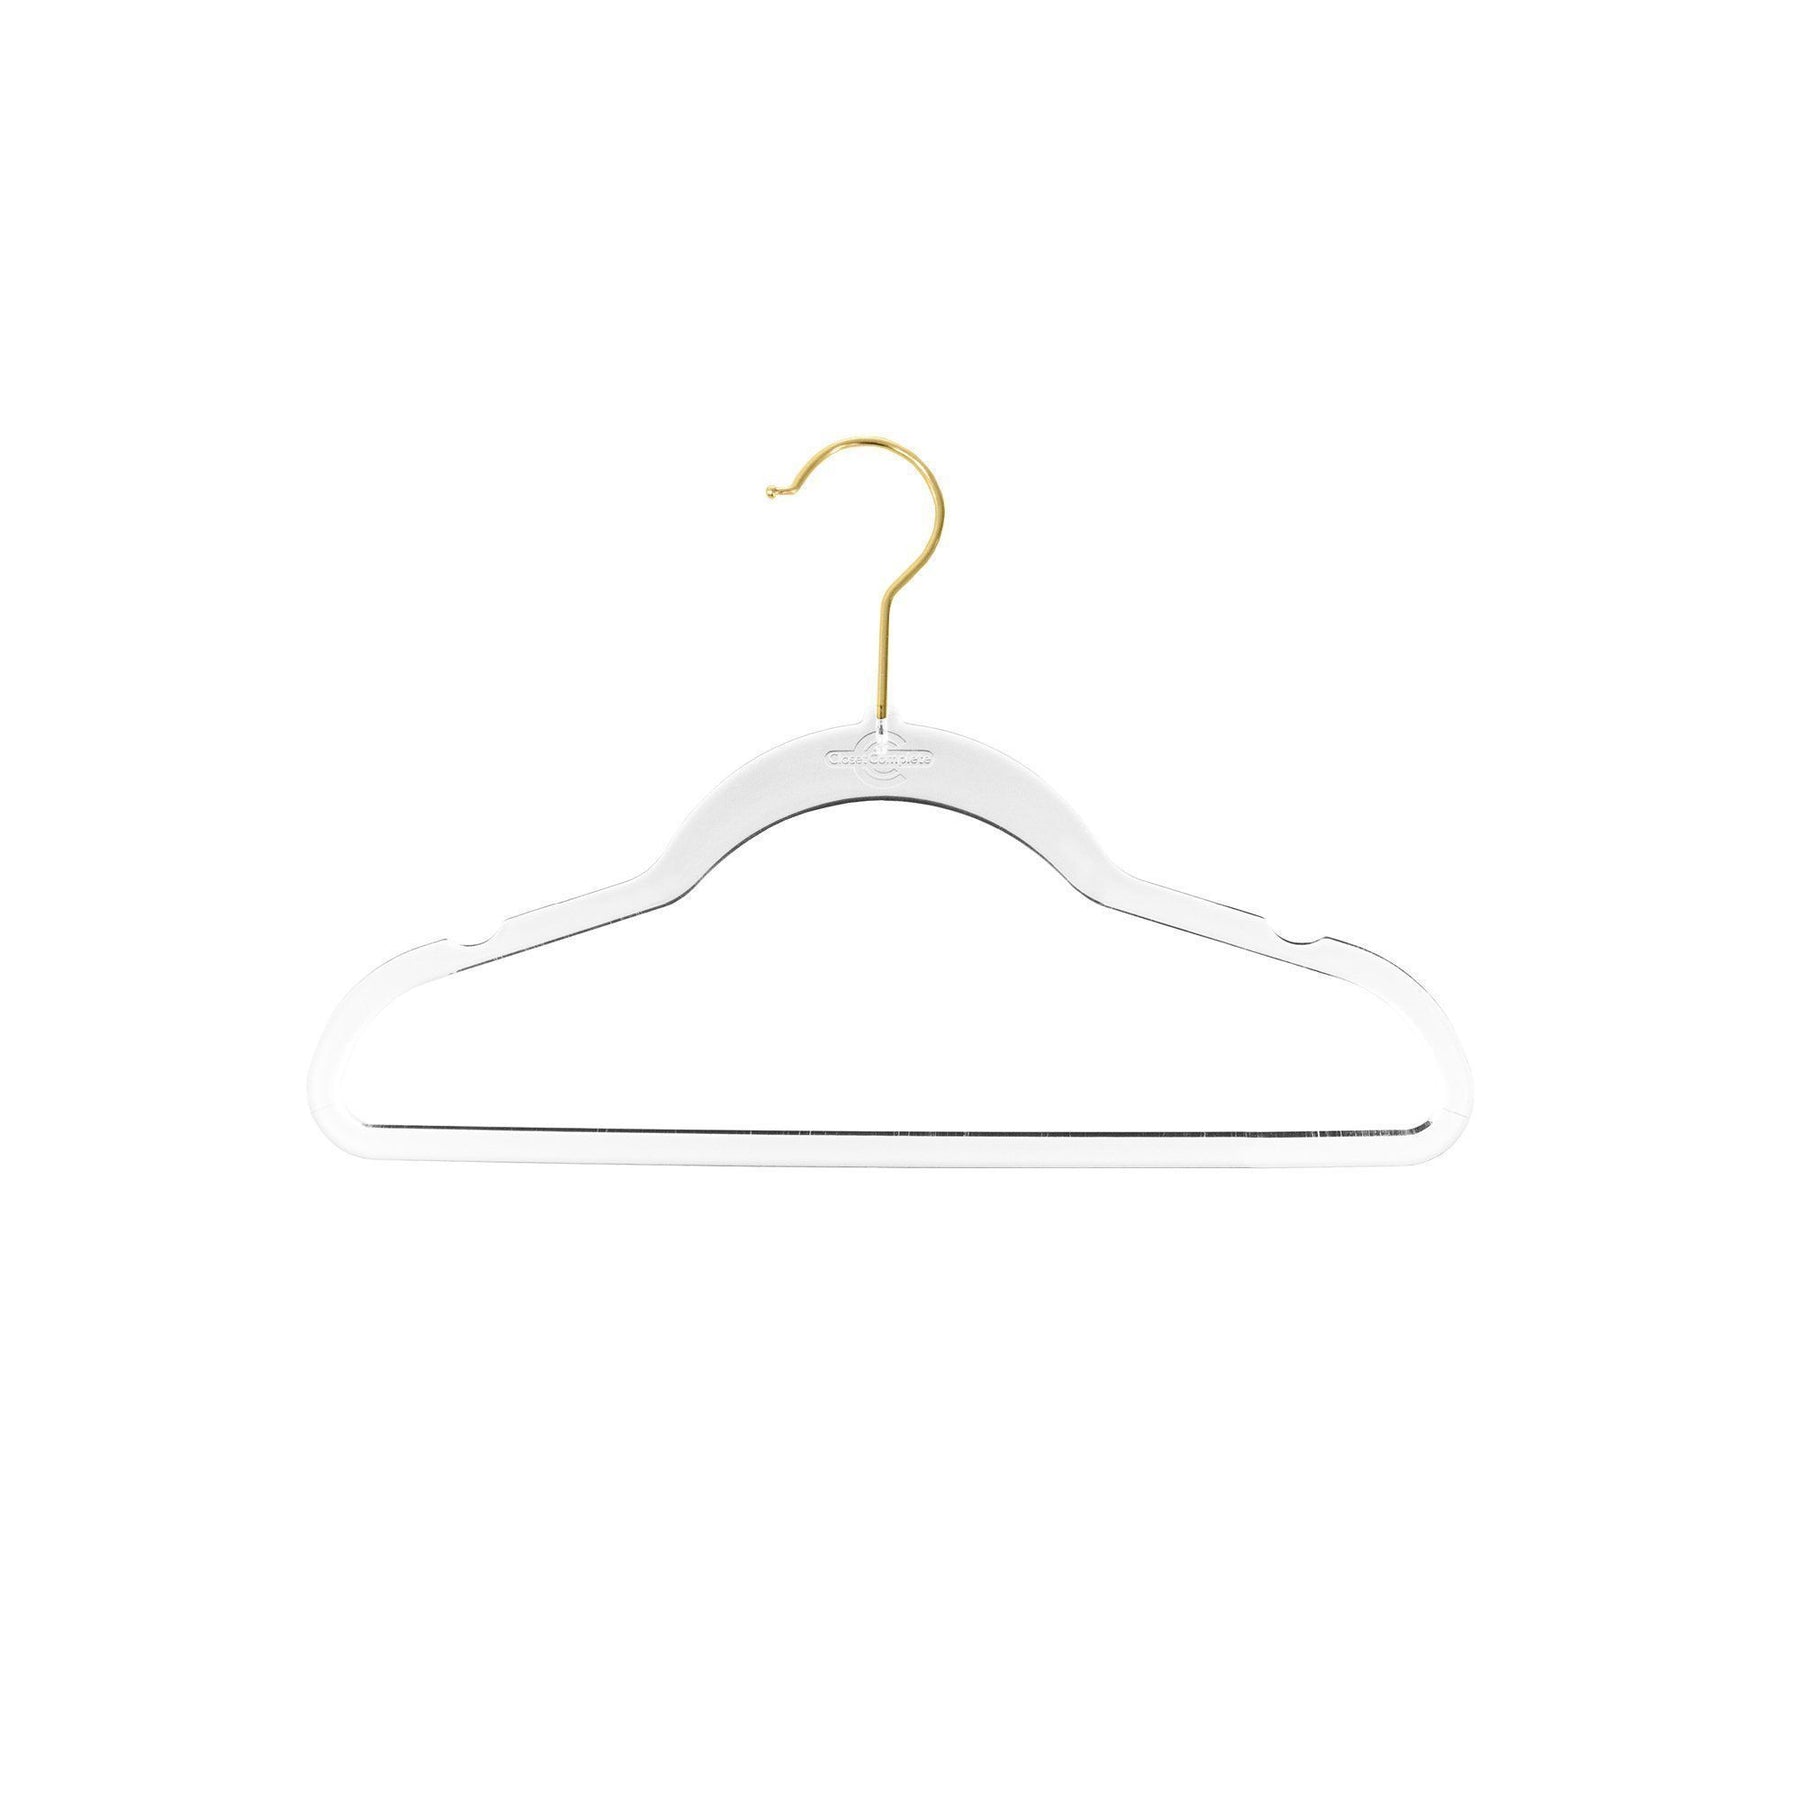 https://cdn.shopify.com/s/files/1/2993/5404/products/closet-complete-acrylic-hangers-kids-baby-sized-completely-clear-acrylic-hangers-69190-7162299613269_1800x1800.jpg?v=1552520336